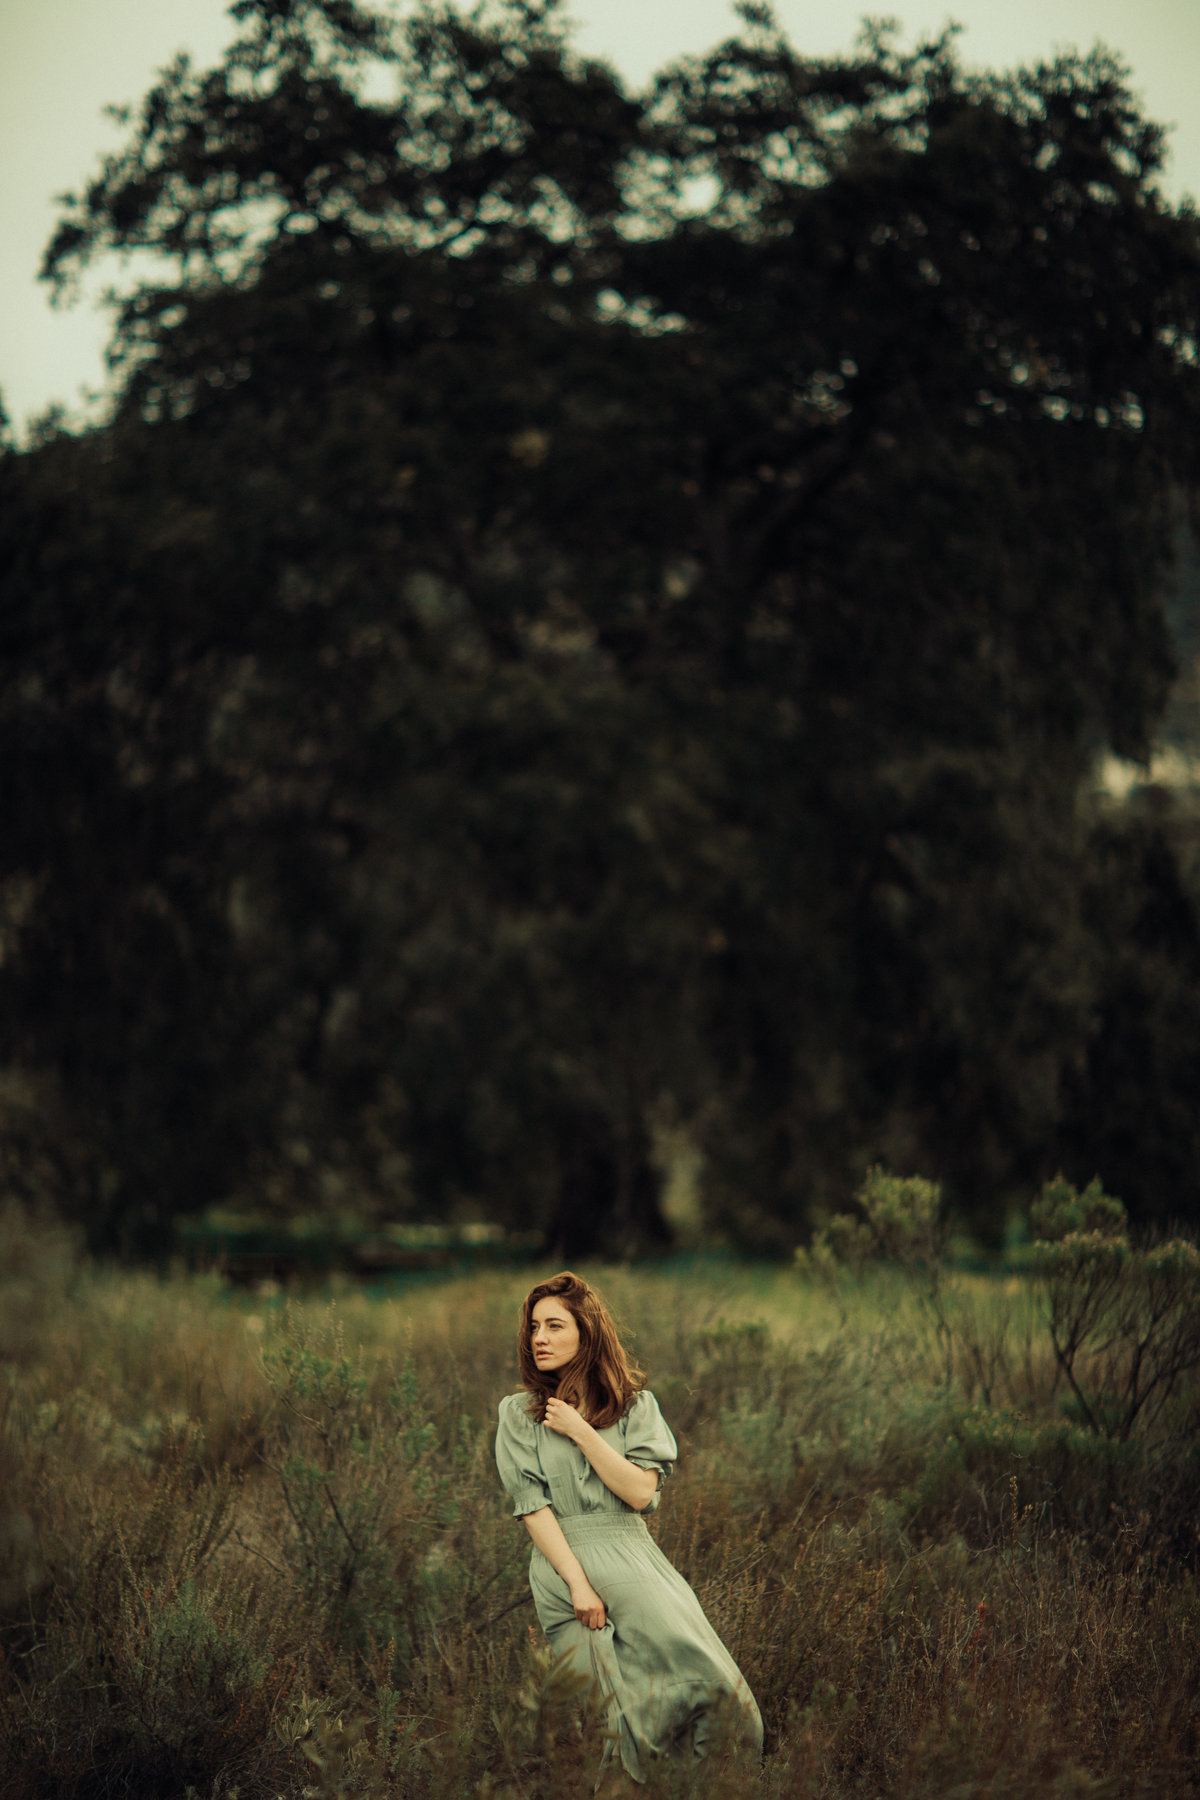 Portrait Photo Of Young Woman With Her Dress Being Blown By The Wind In The Middle Of a Meadow Los Angeles